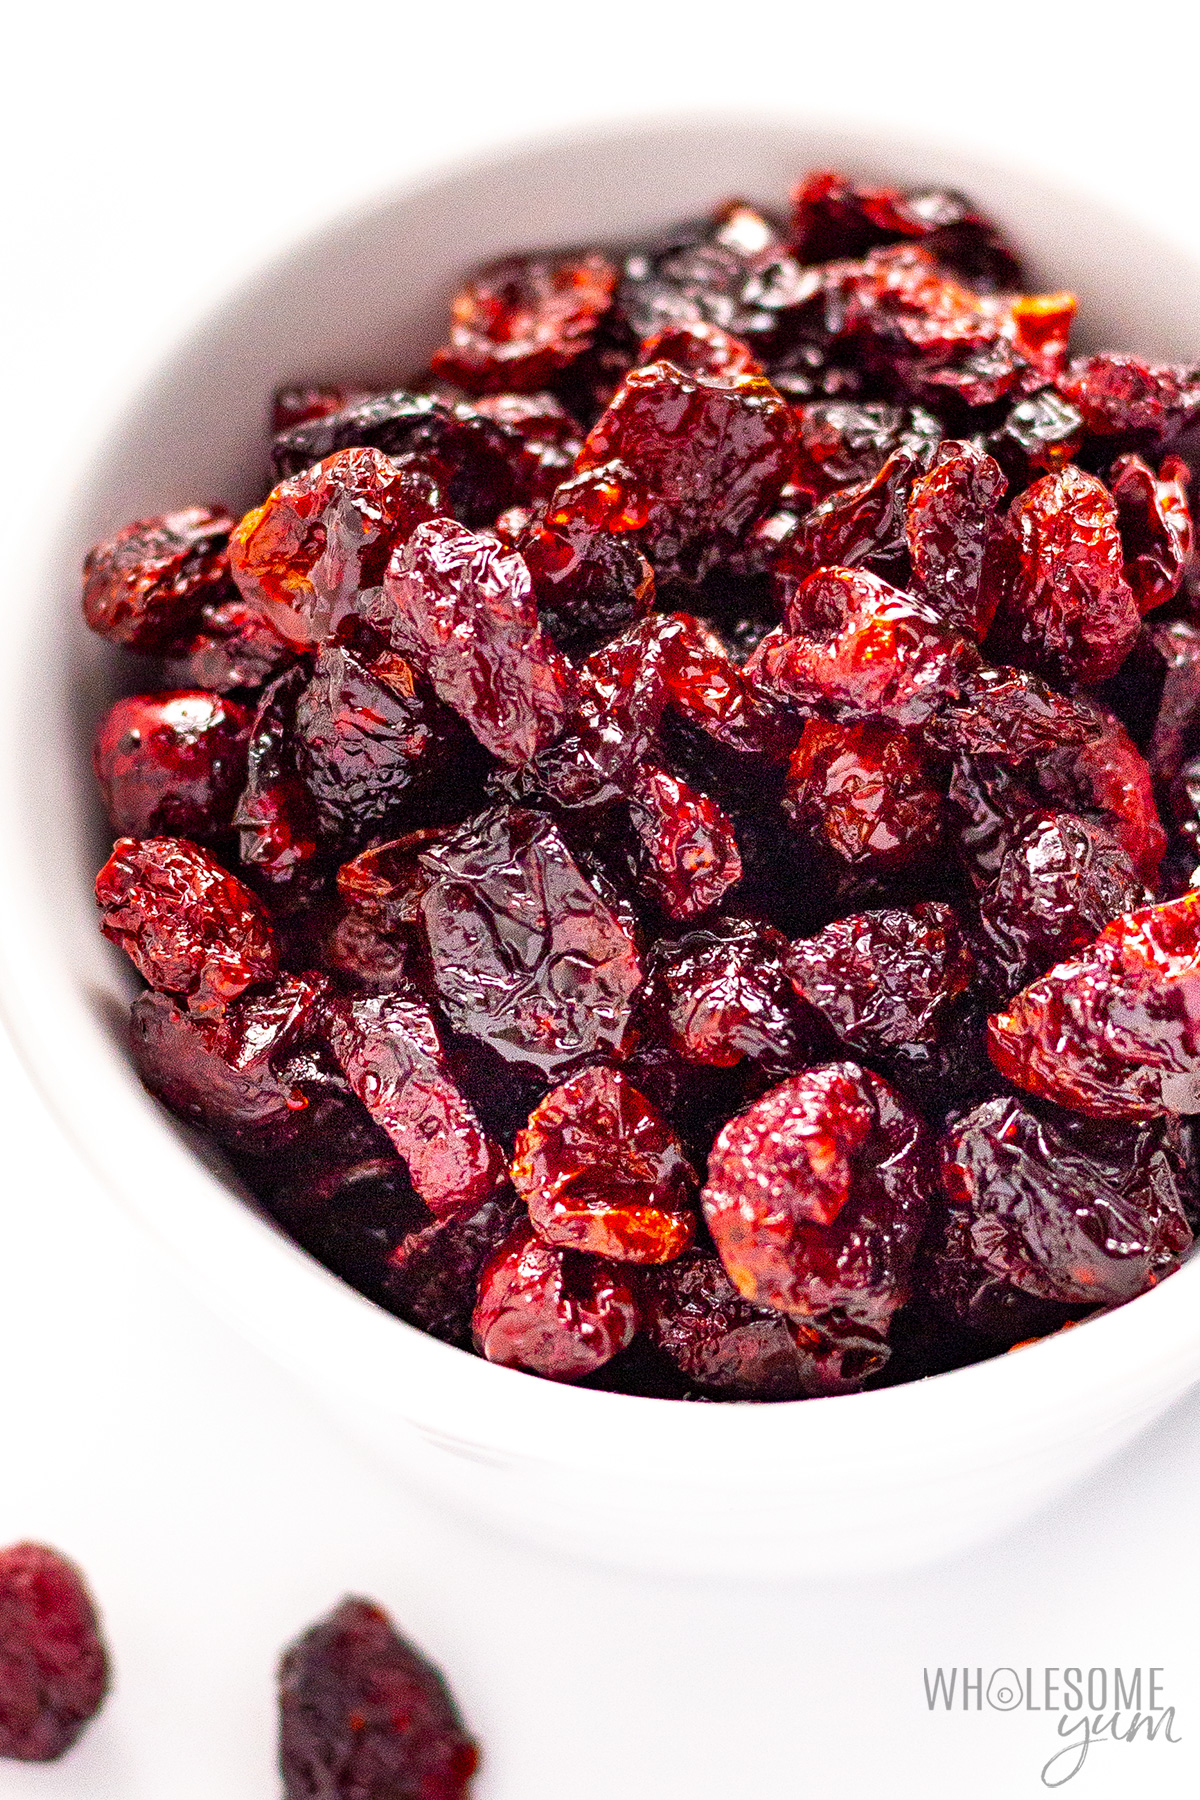 Dried unsweetened cranberries in a bowl